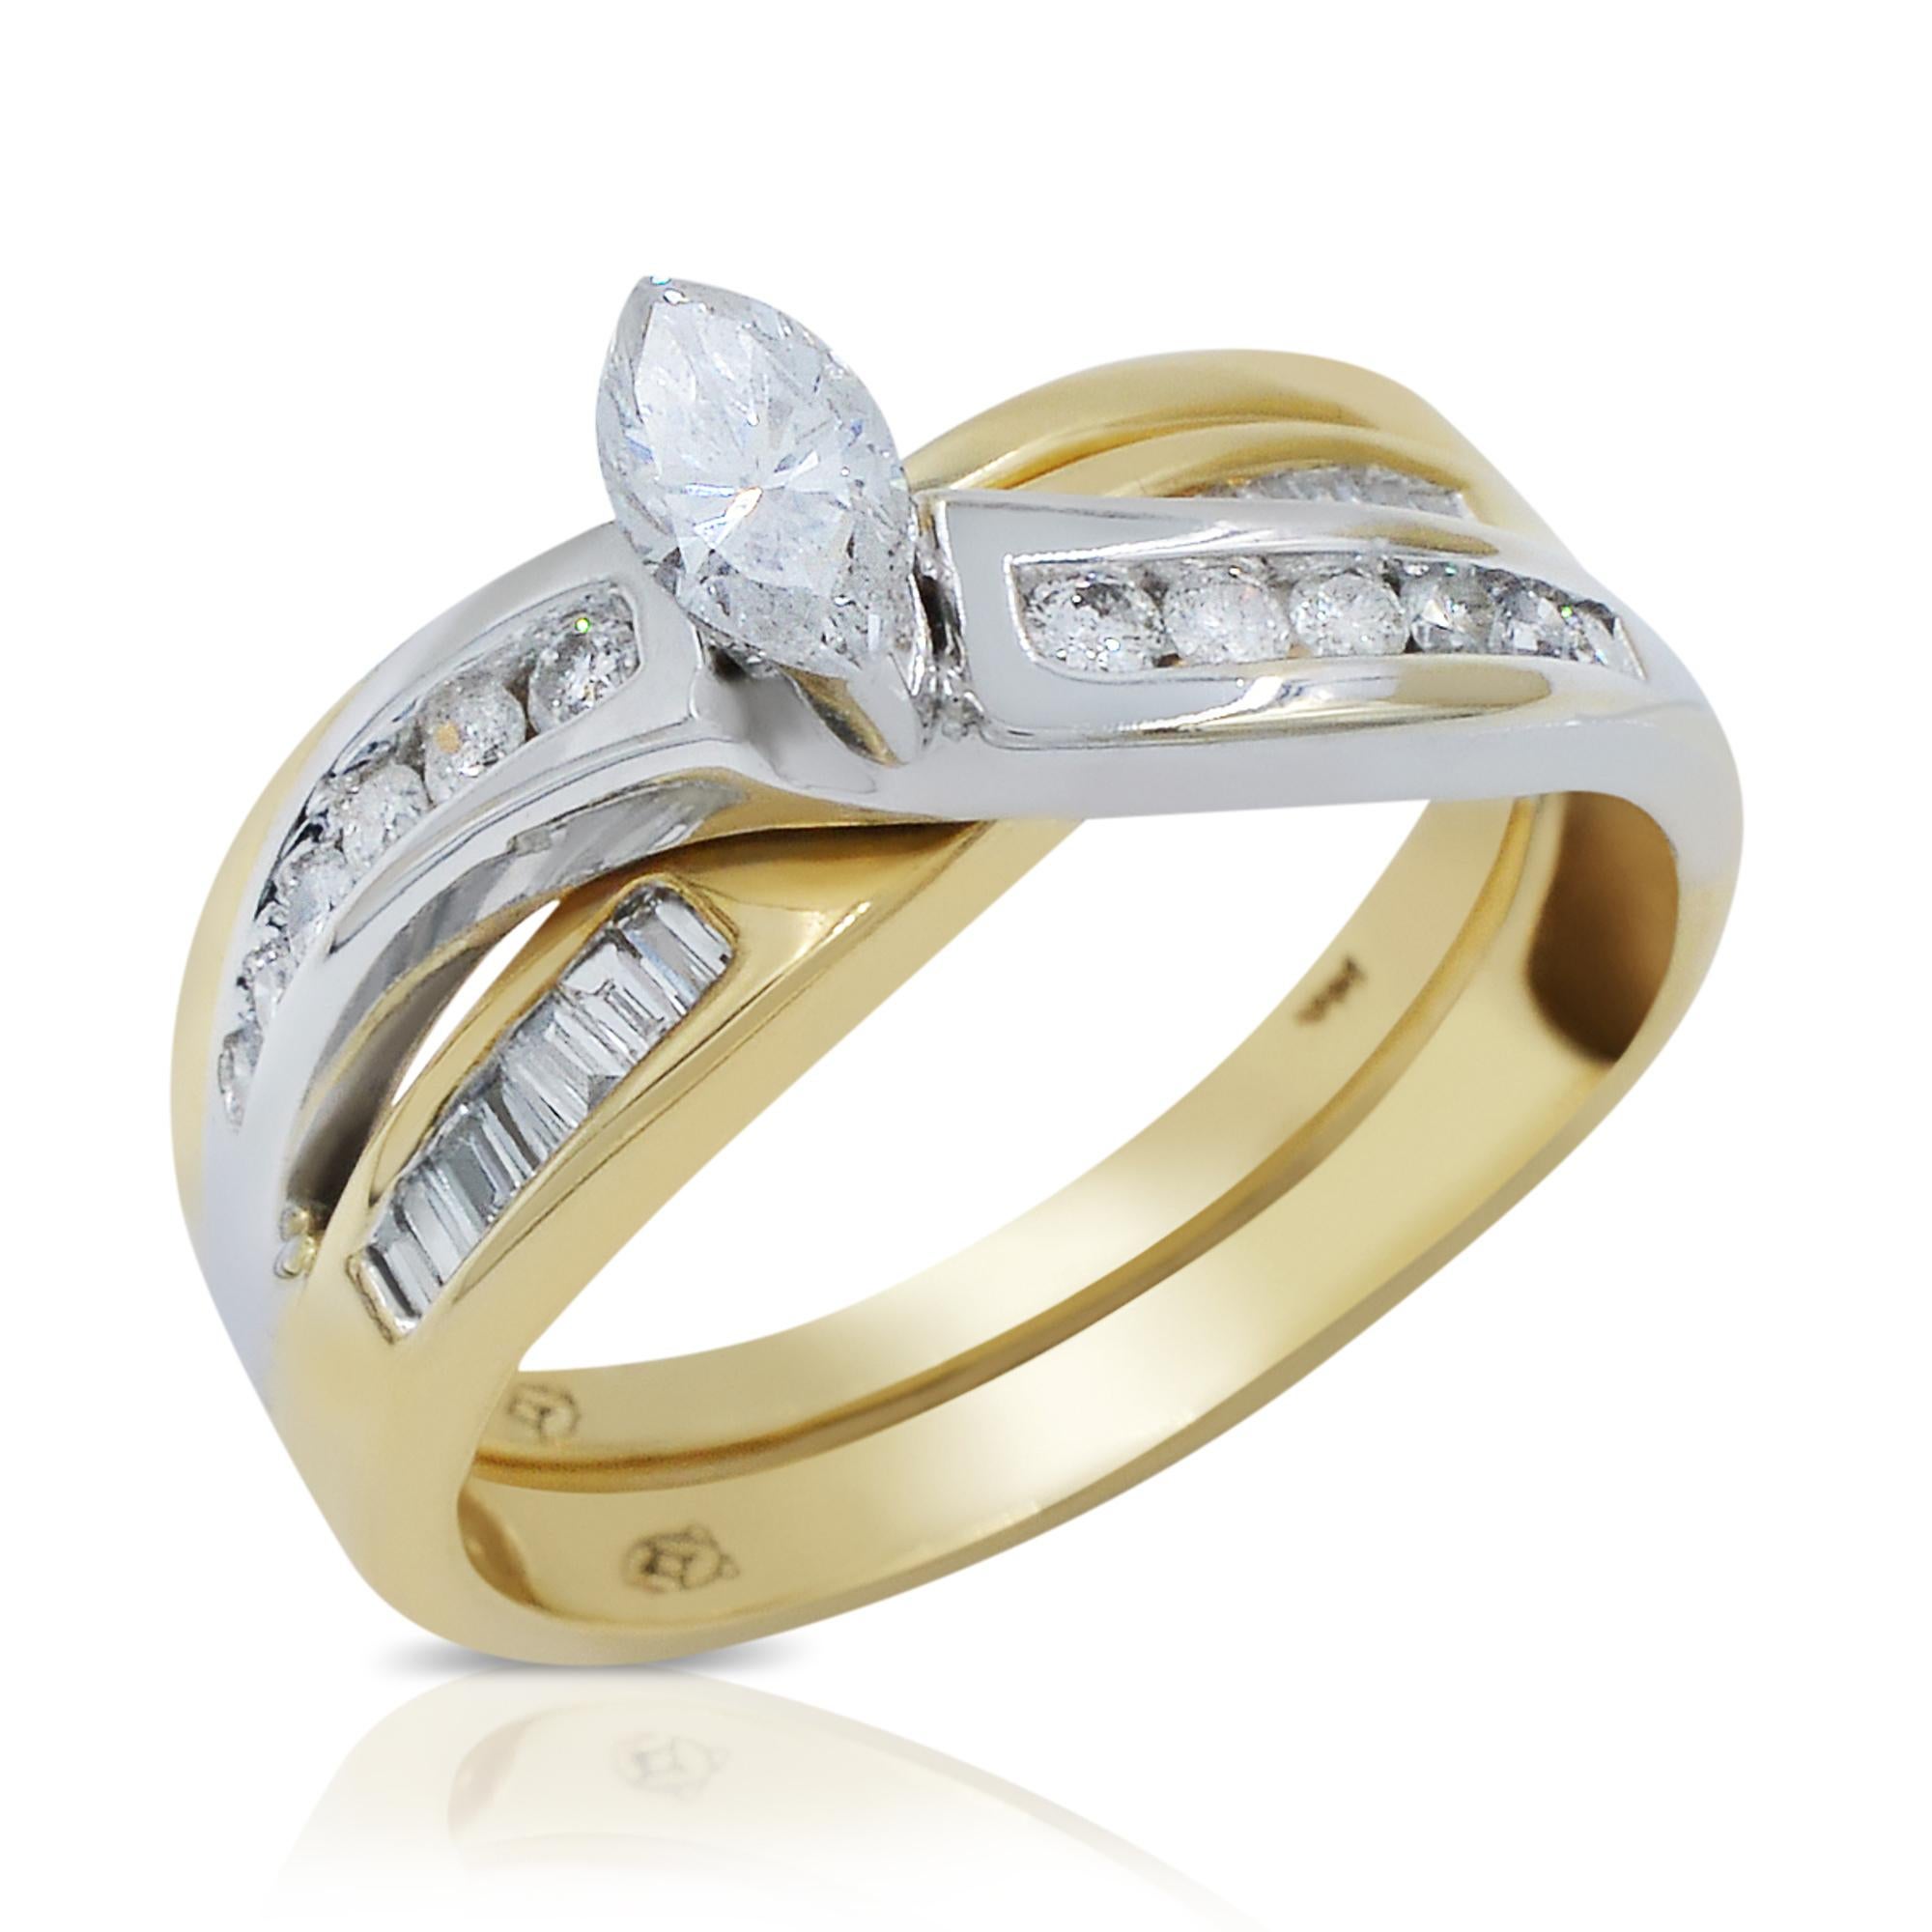 Rachel Koen Marquise Cut Diamond Engagement Ring Set 14K Yellow Gold 1.05Cttw In New Condition For Sale In New York, NY